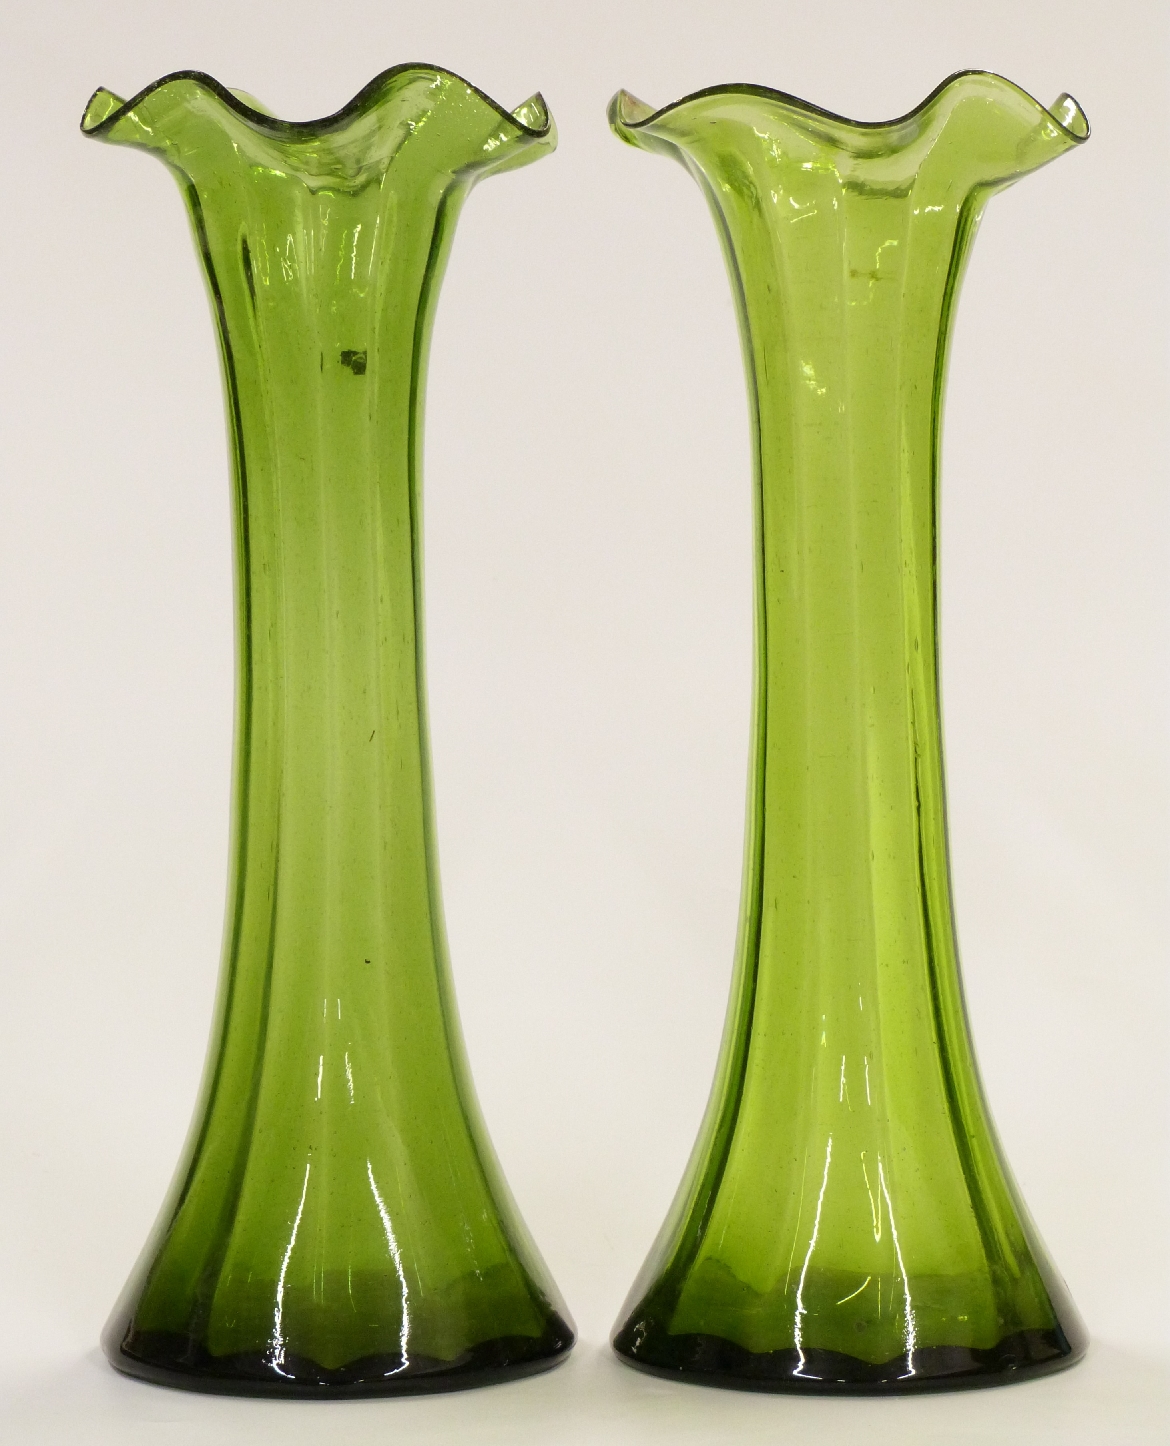 A pair of Art Nouveau green glass vases with frilled rims, 30cm tall.